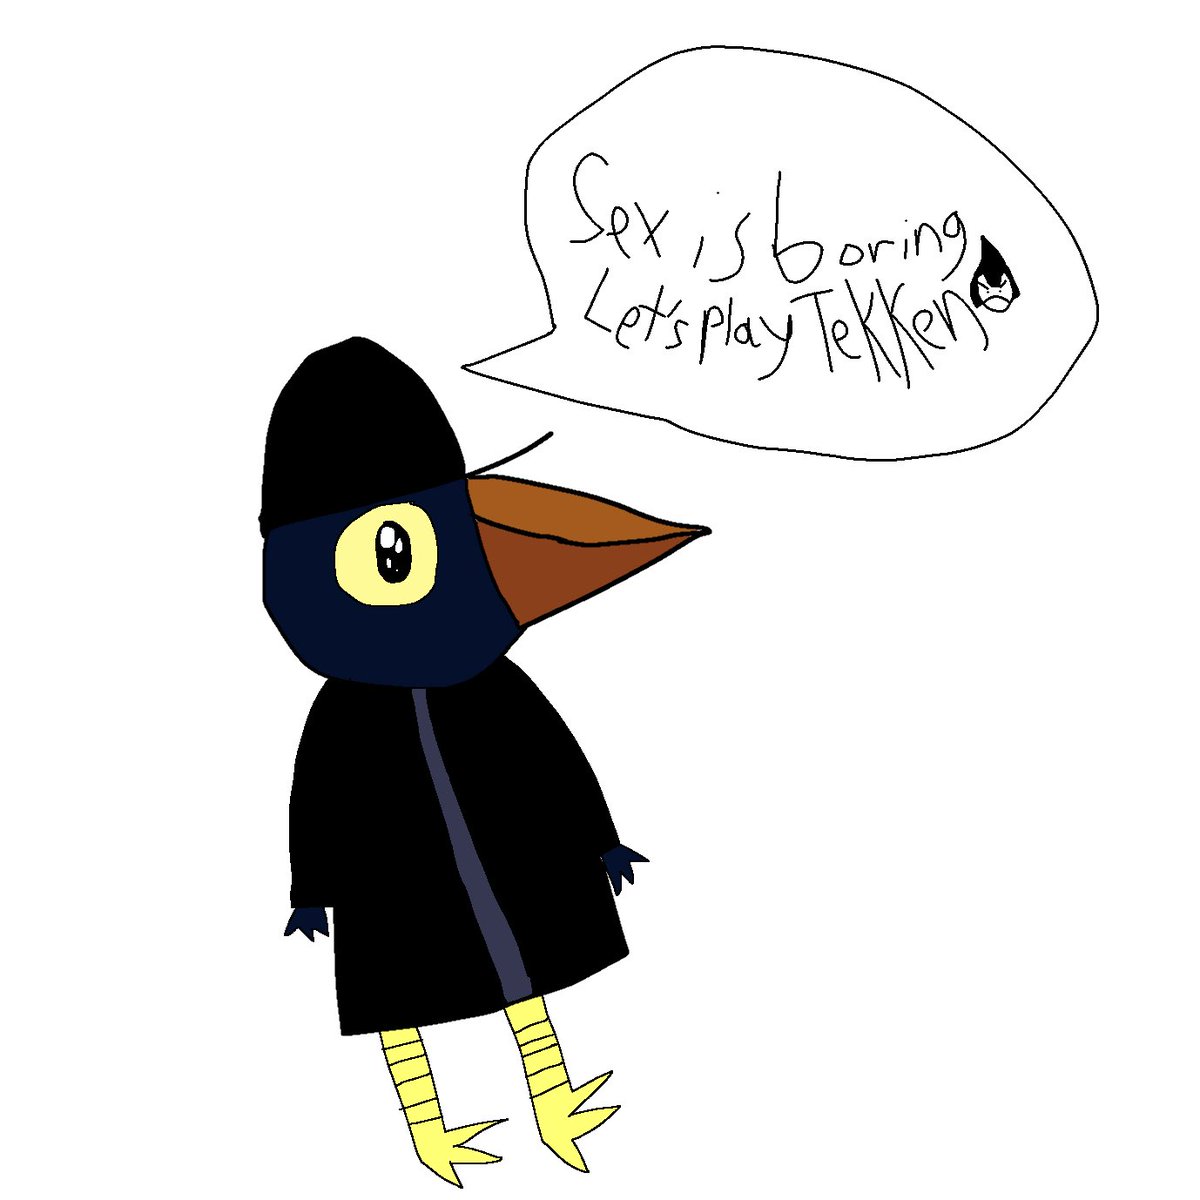 The birdie who arrow ace of spades or something idk